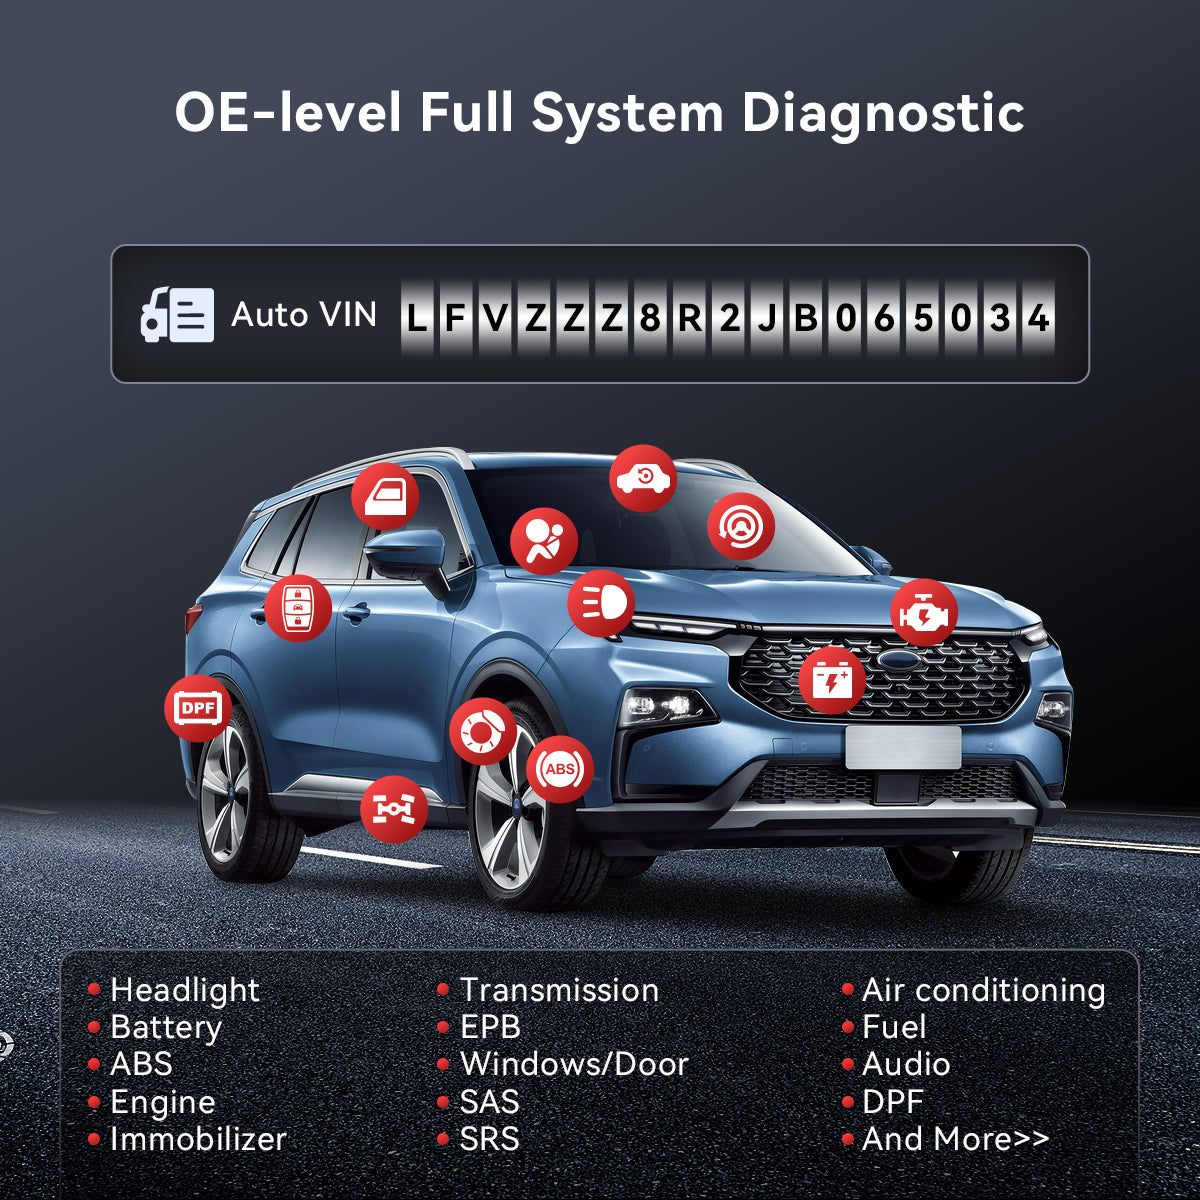 DriverScan OE-level Full System Diagnostic